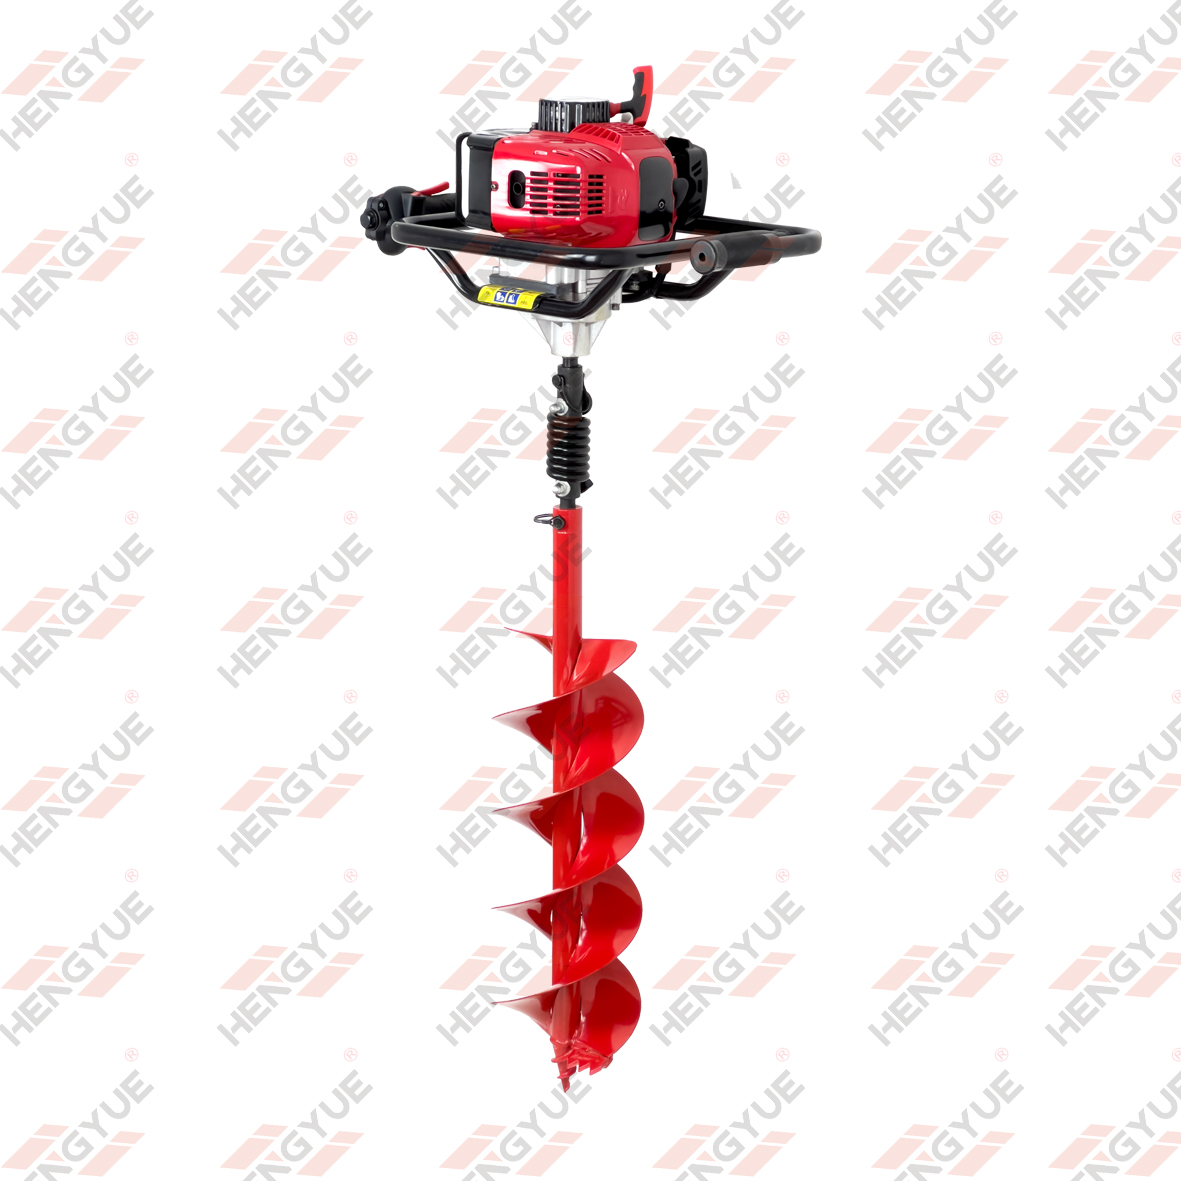 Powered by HONDA GX50 Engine Power Popular Hand Held Type Earth Auger 